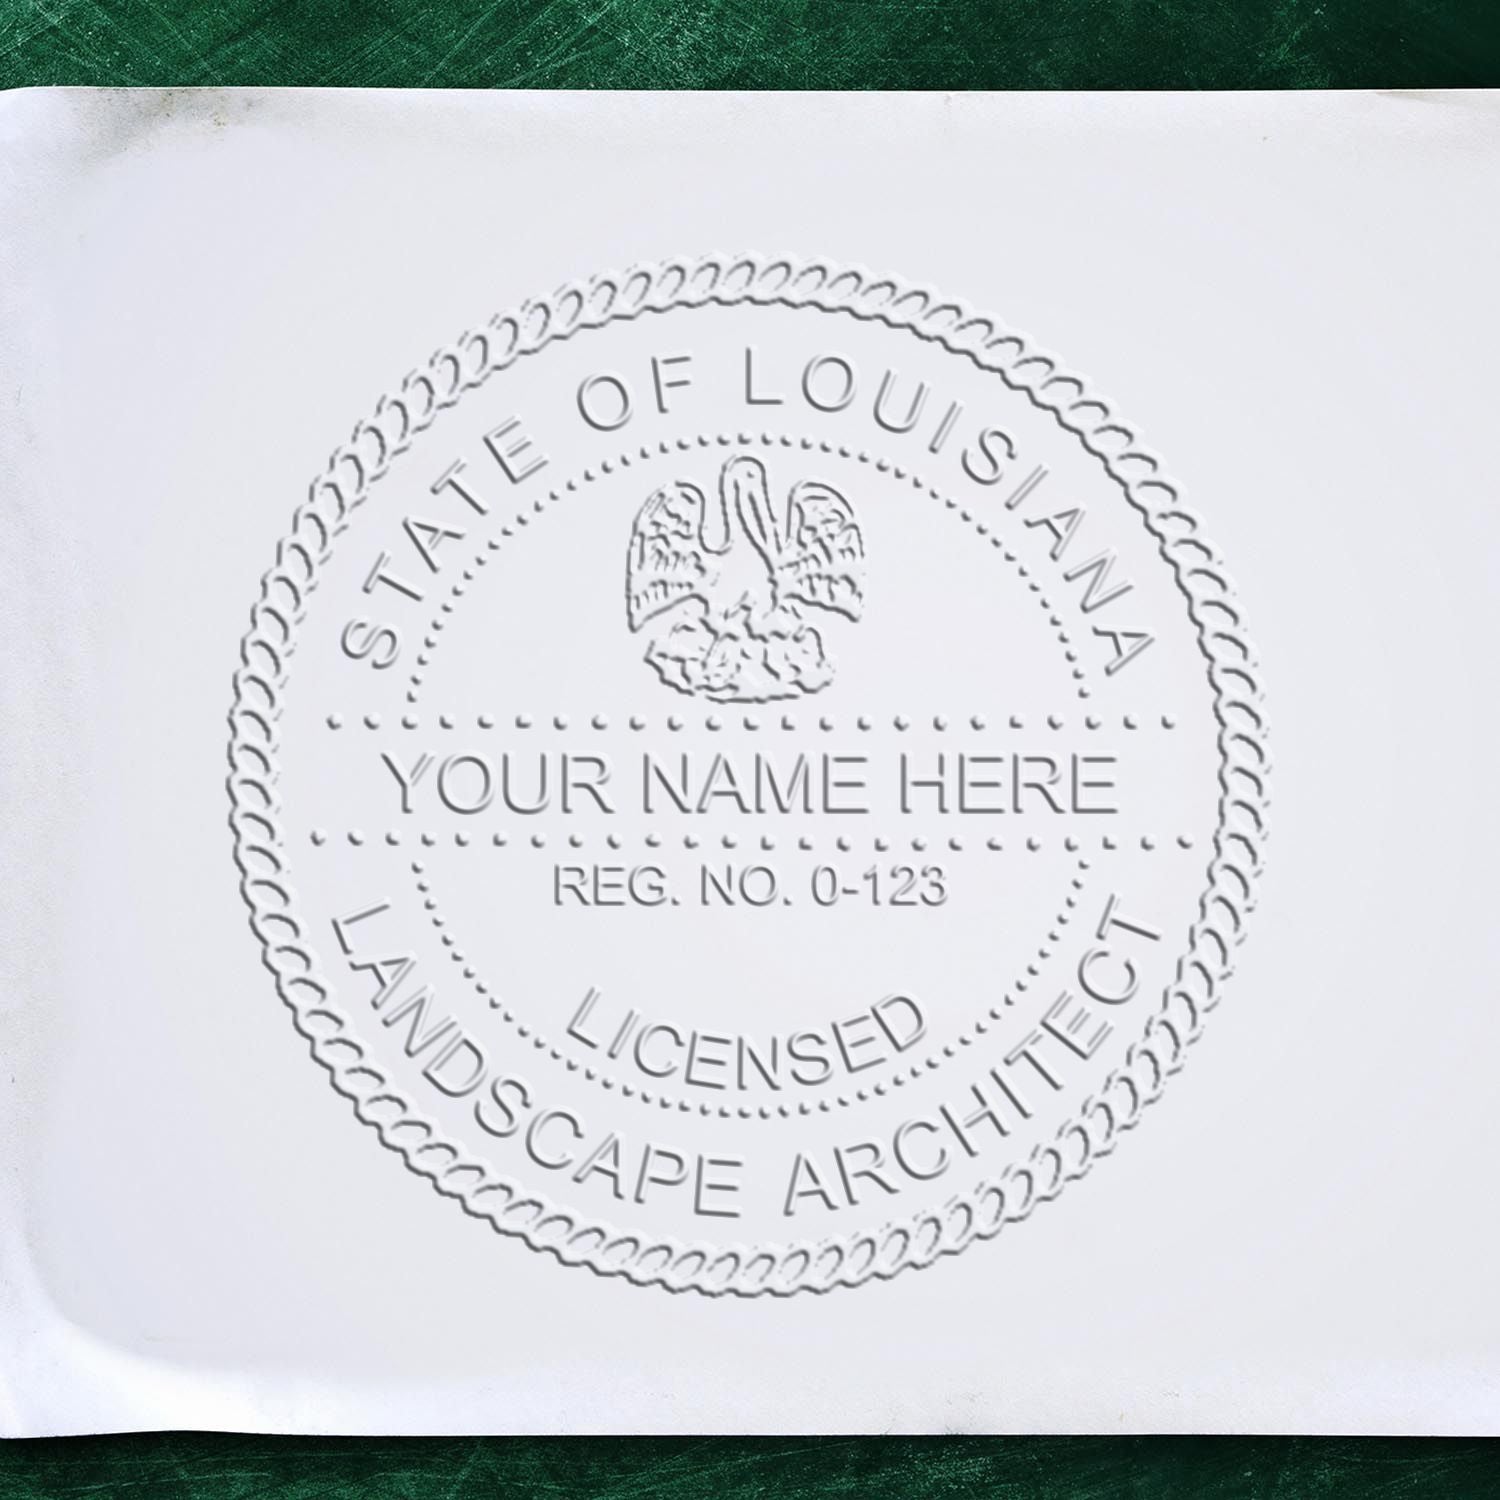 A stamped imprint of the Gift Louisiana Landscape Architect Seal in this stylish lifestyle photo, setting the tone for a unique and personalized product.